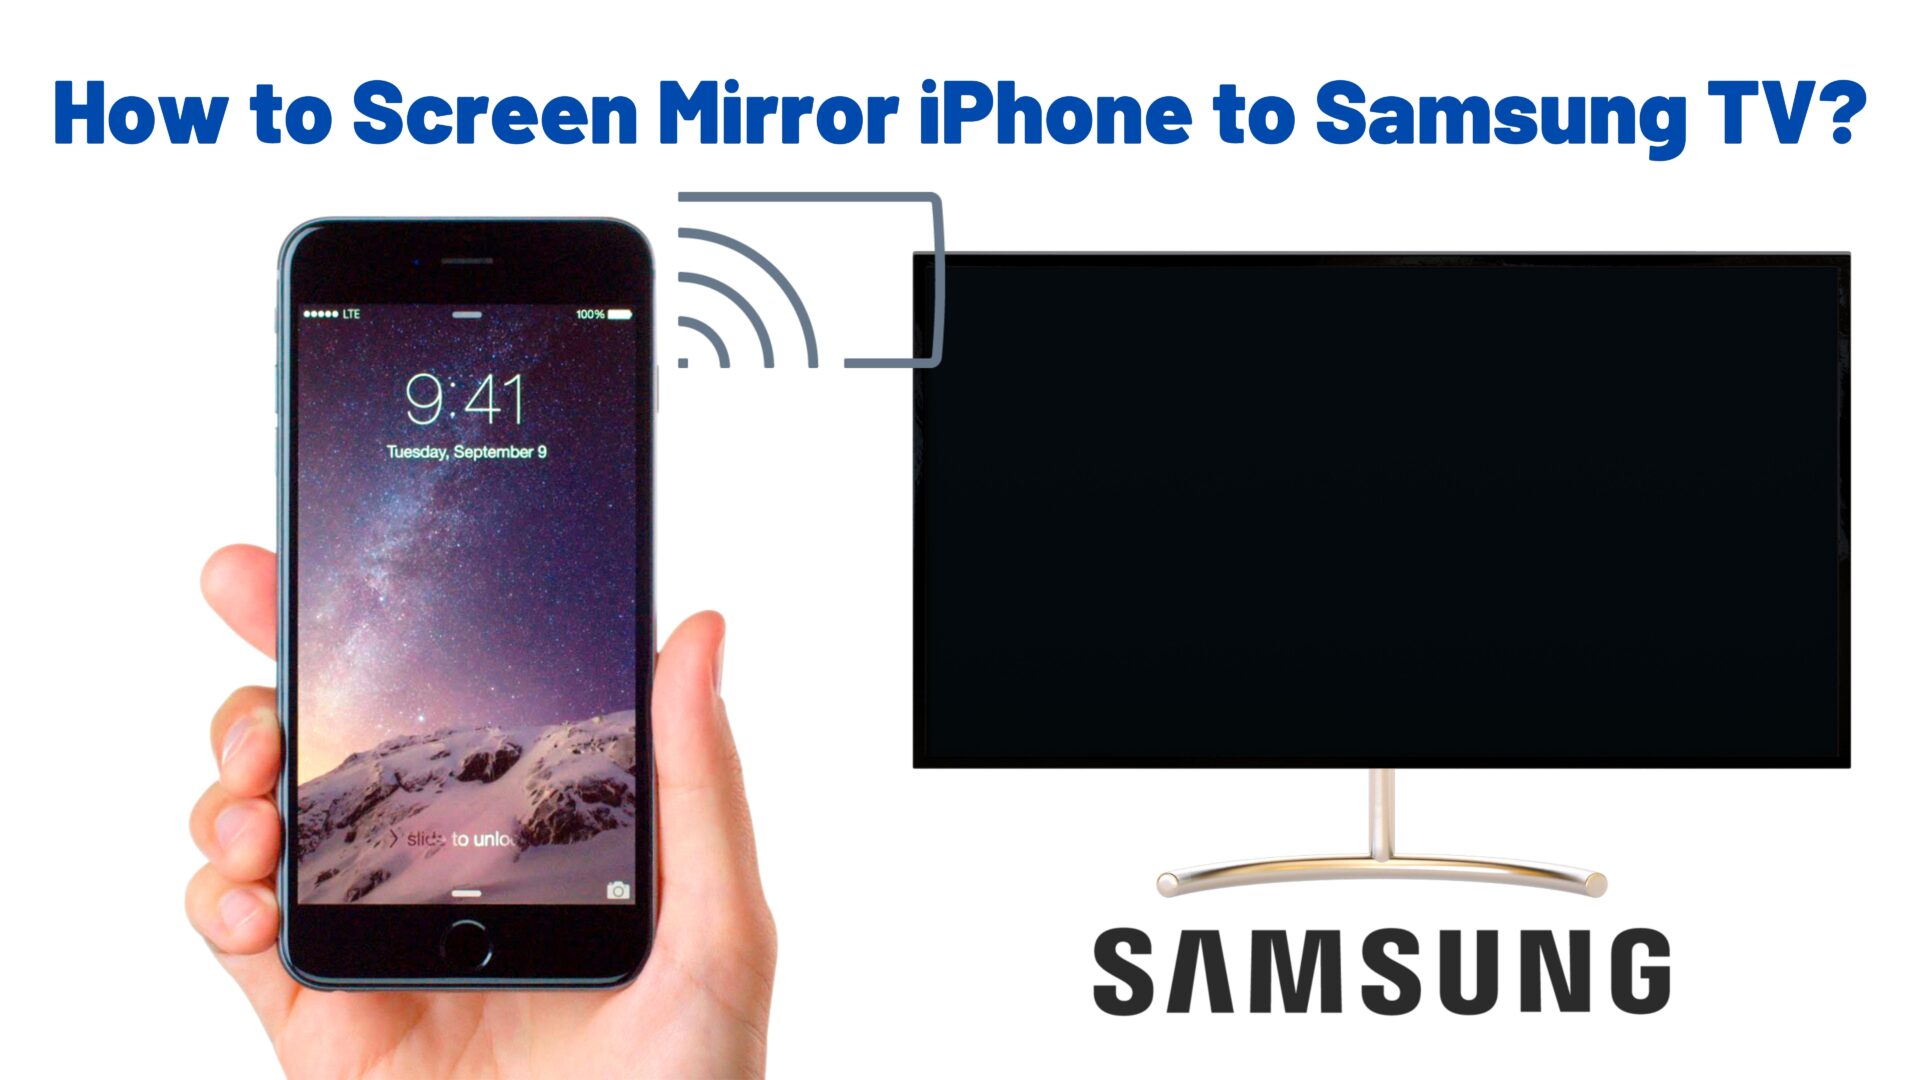 How to Screen Mirror iPhone to Samsung TV?